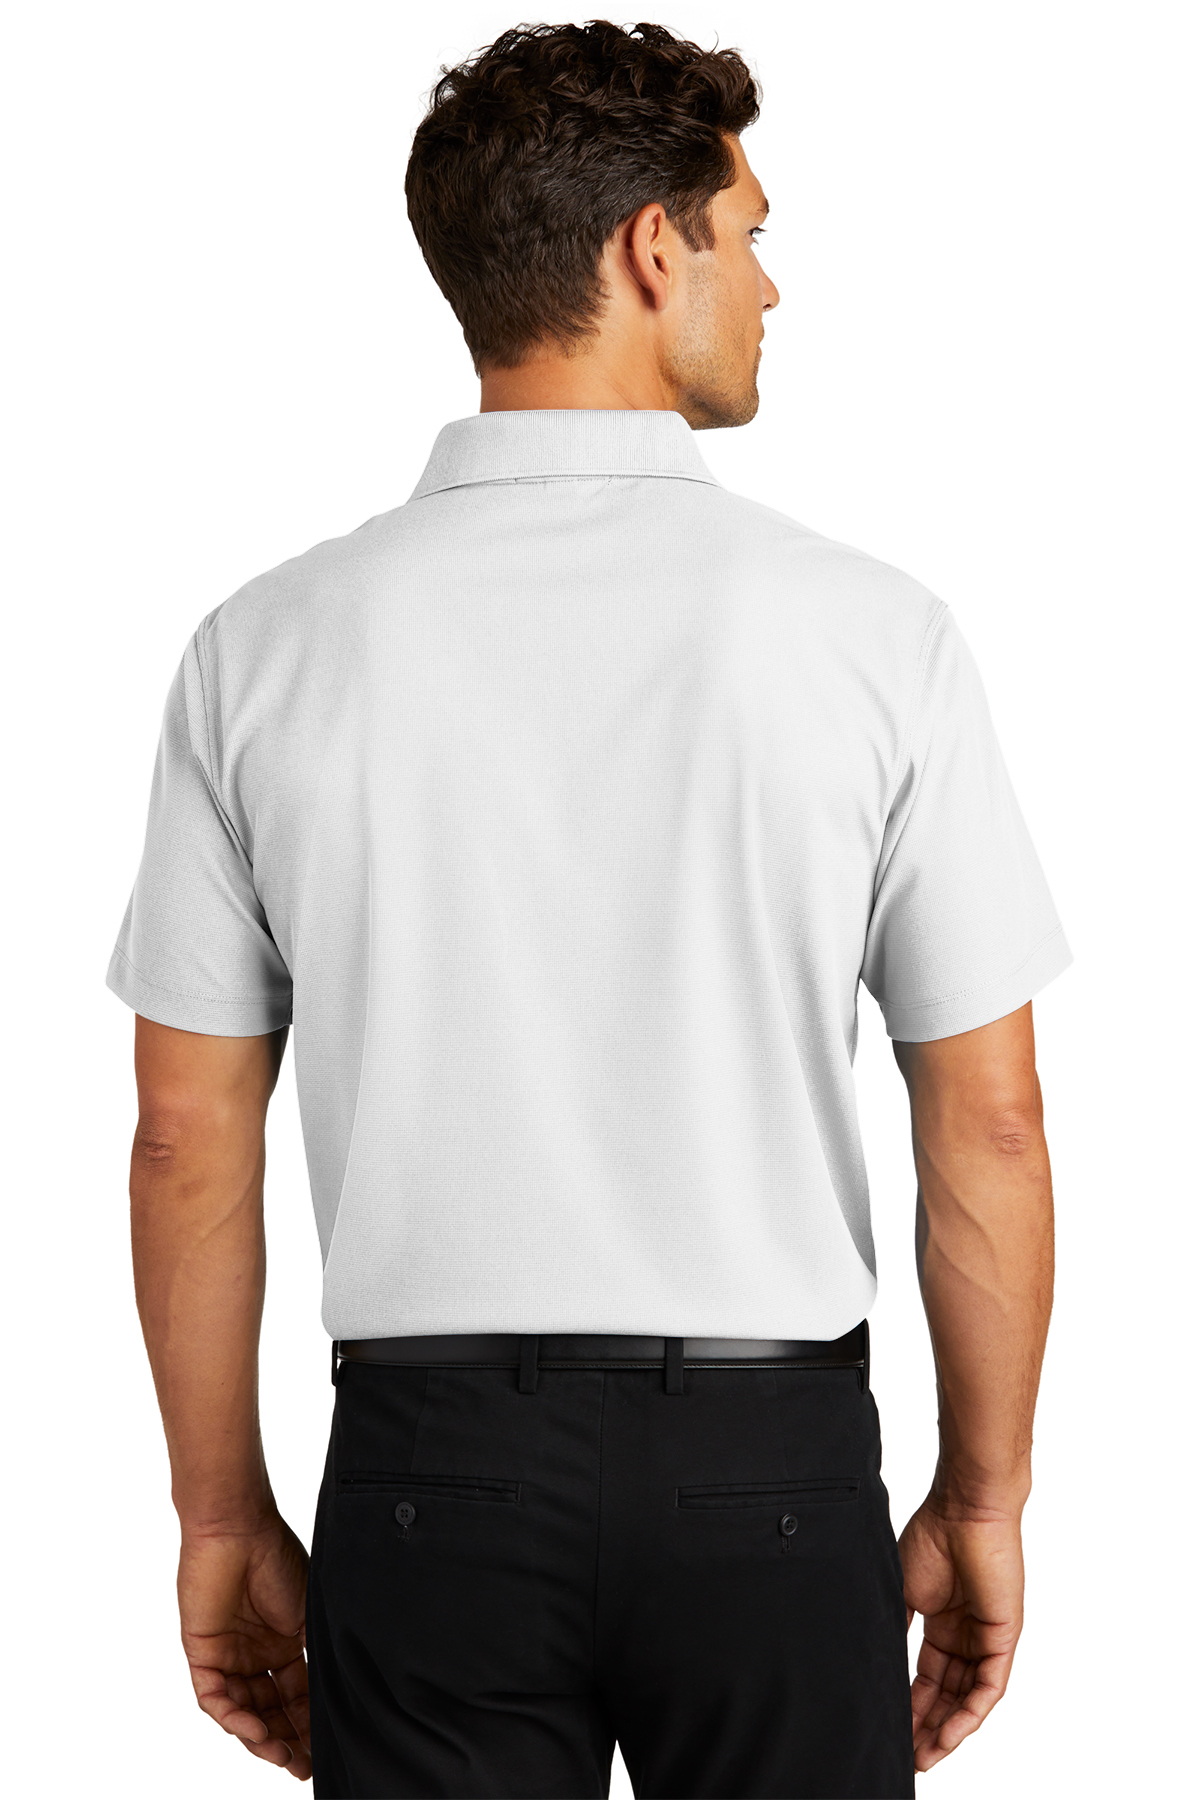 Port Authority ® Dry Zone ® Grid Polo | Product | Port Authority